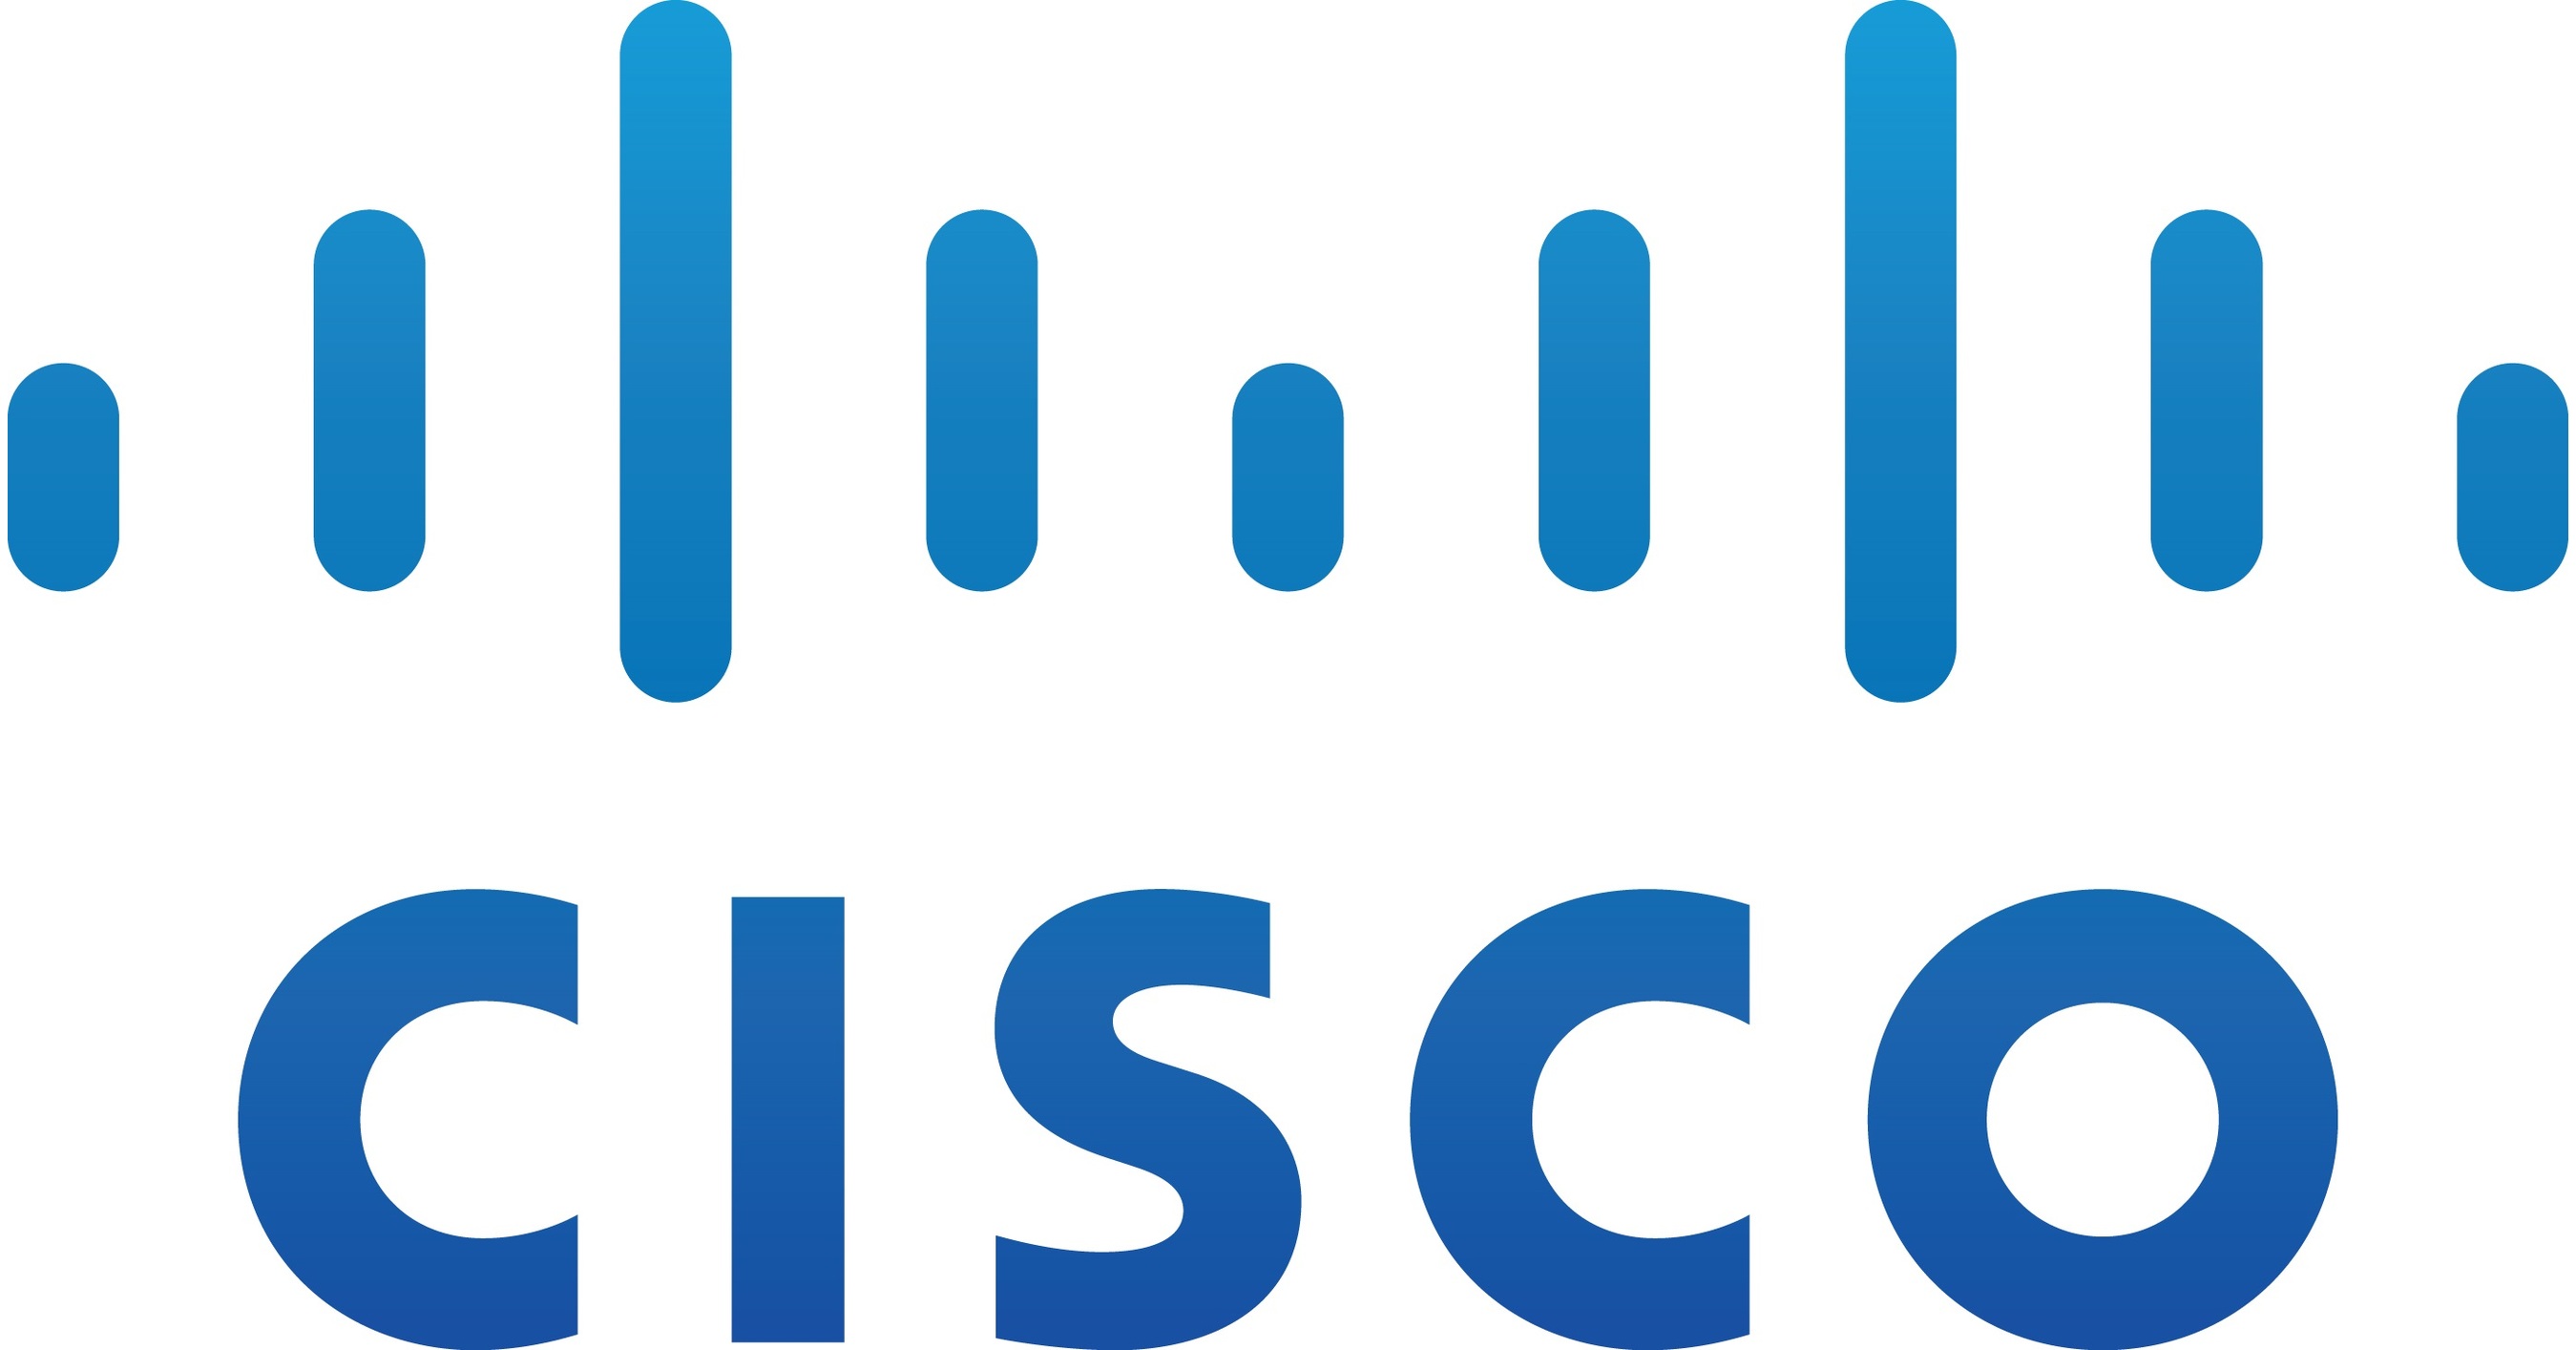 Cisco Launches New Business Performance Insight and Visibility for Modern Applications on AWS